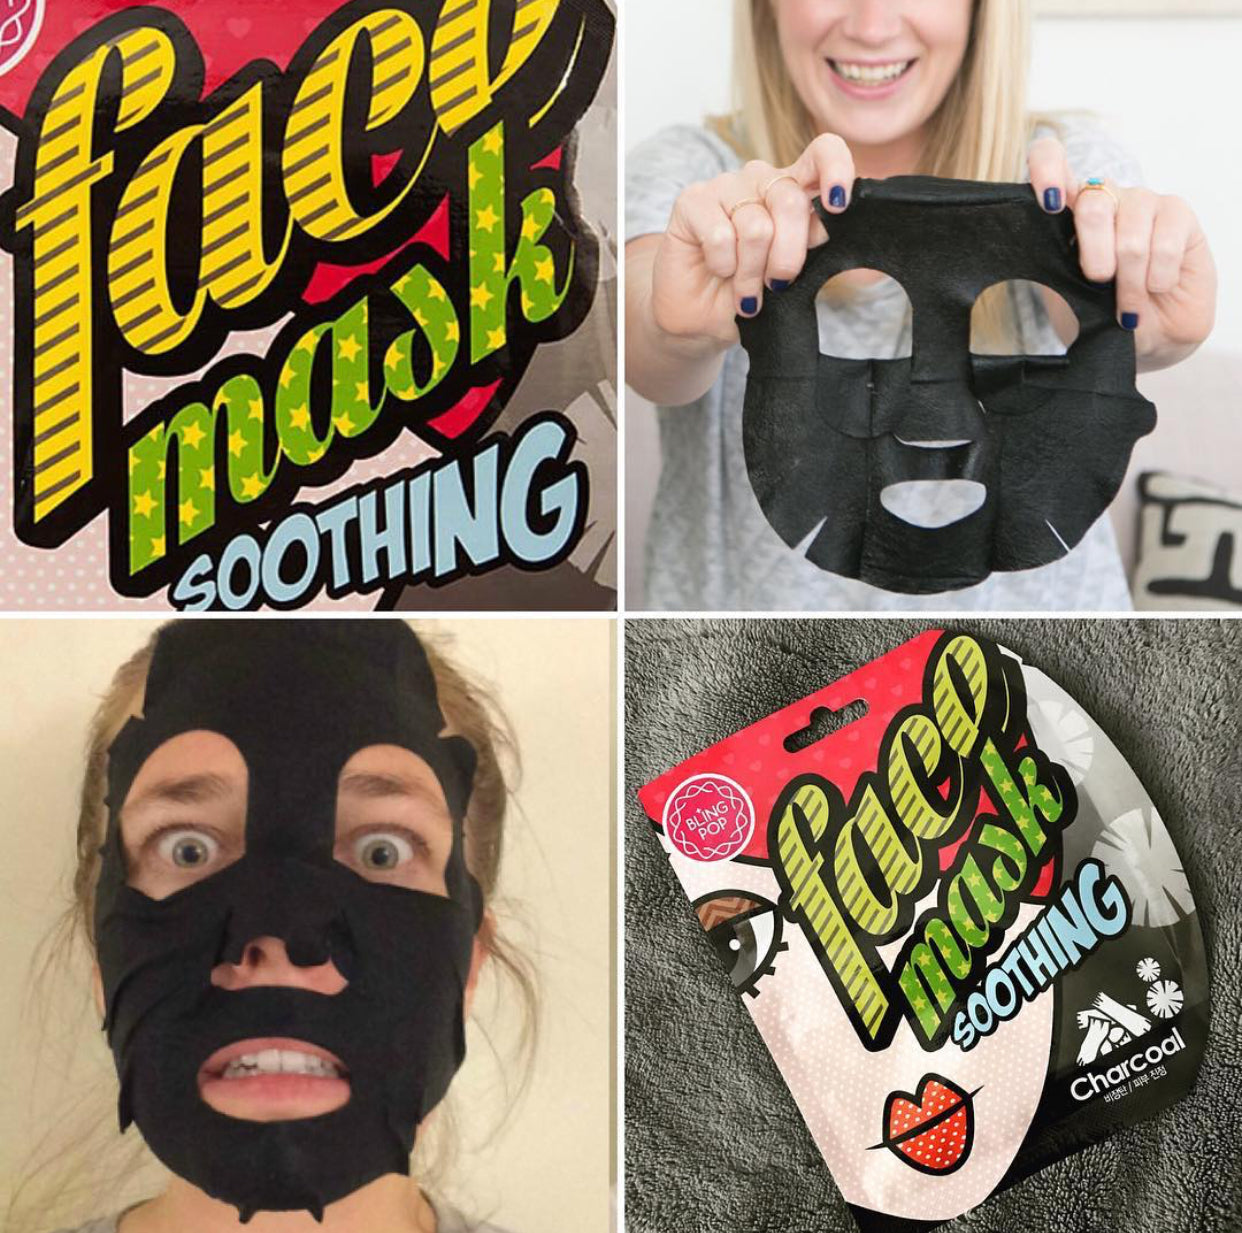 BLING POP Charcoal Face Mask